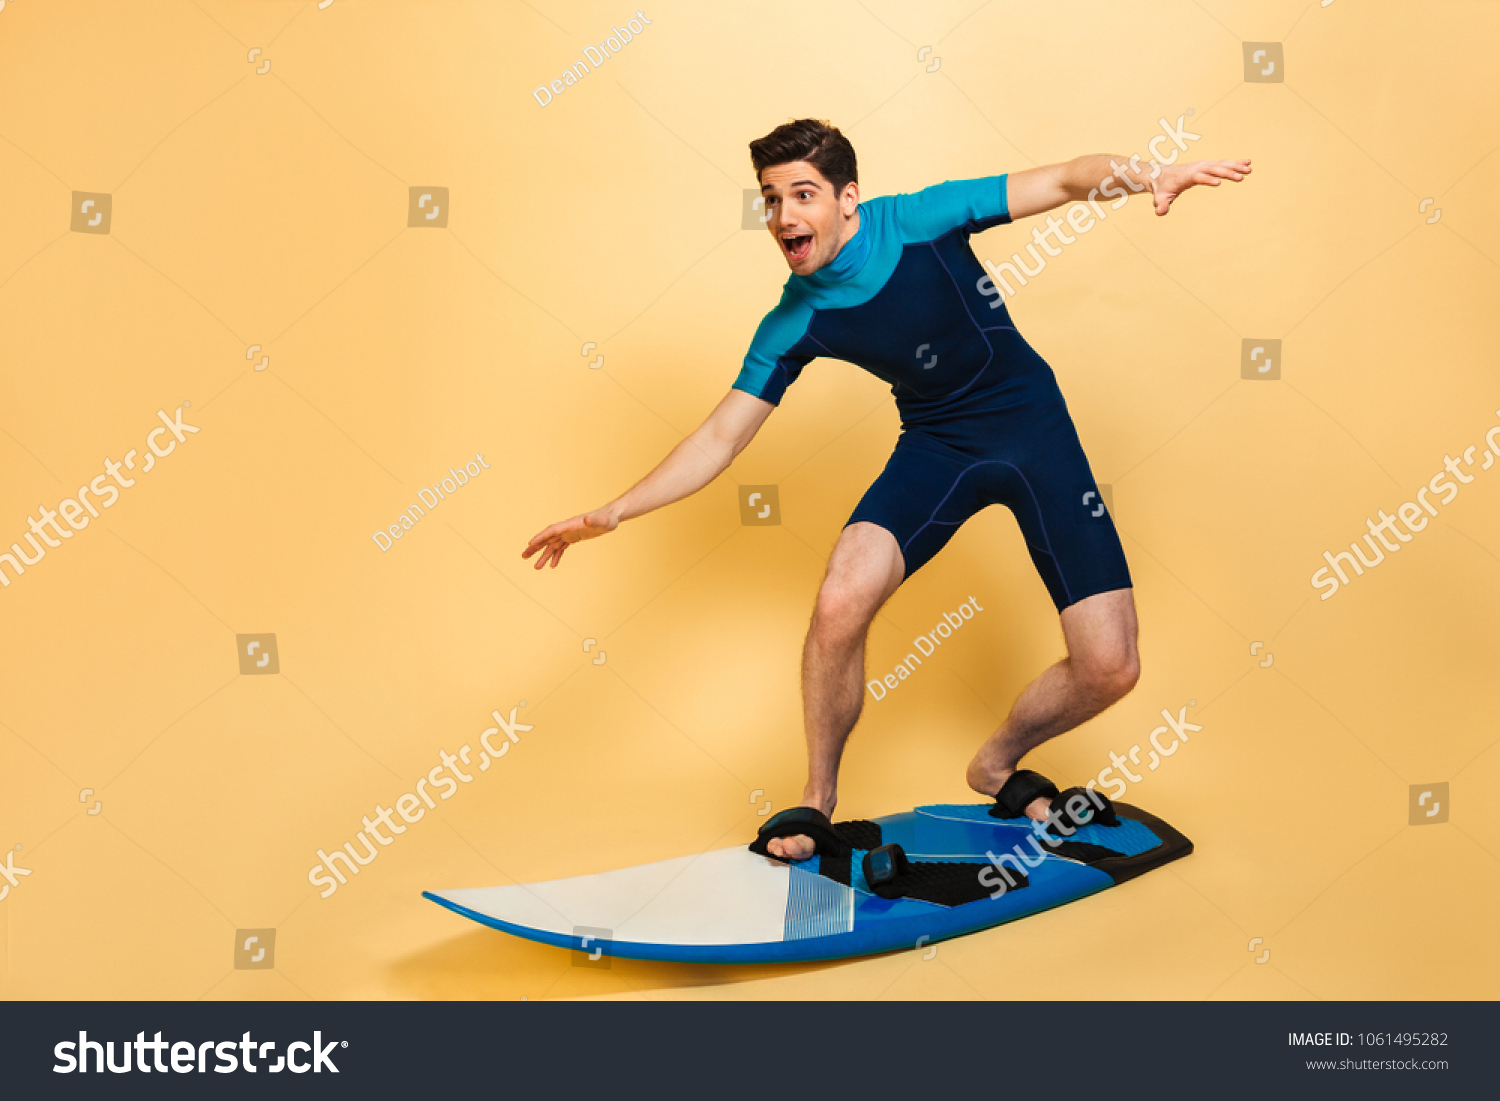 Full length portrait of an excited young man dressed in swimsuit surfing on a board isolated over yellow background #1061495282